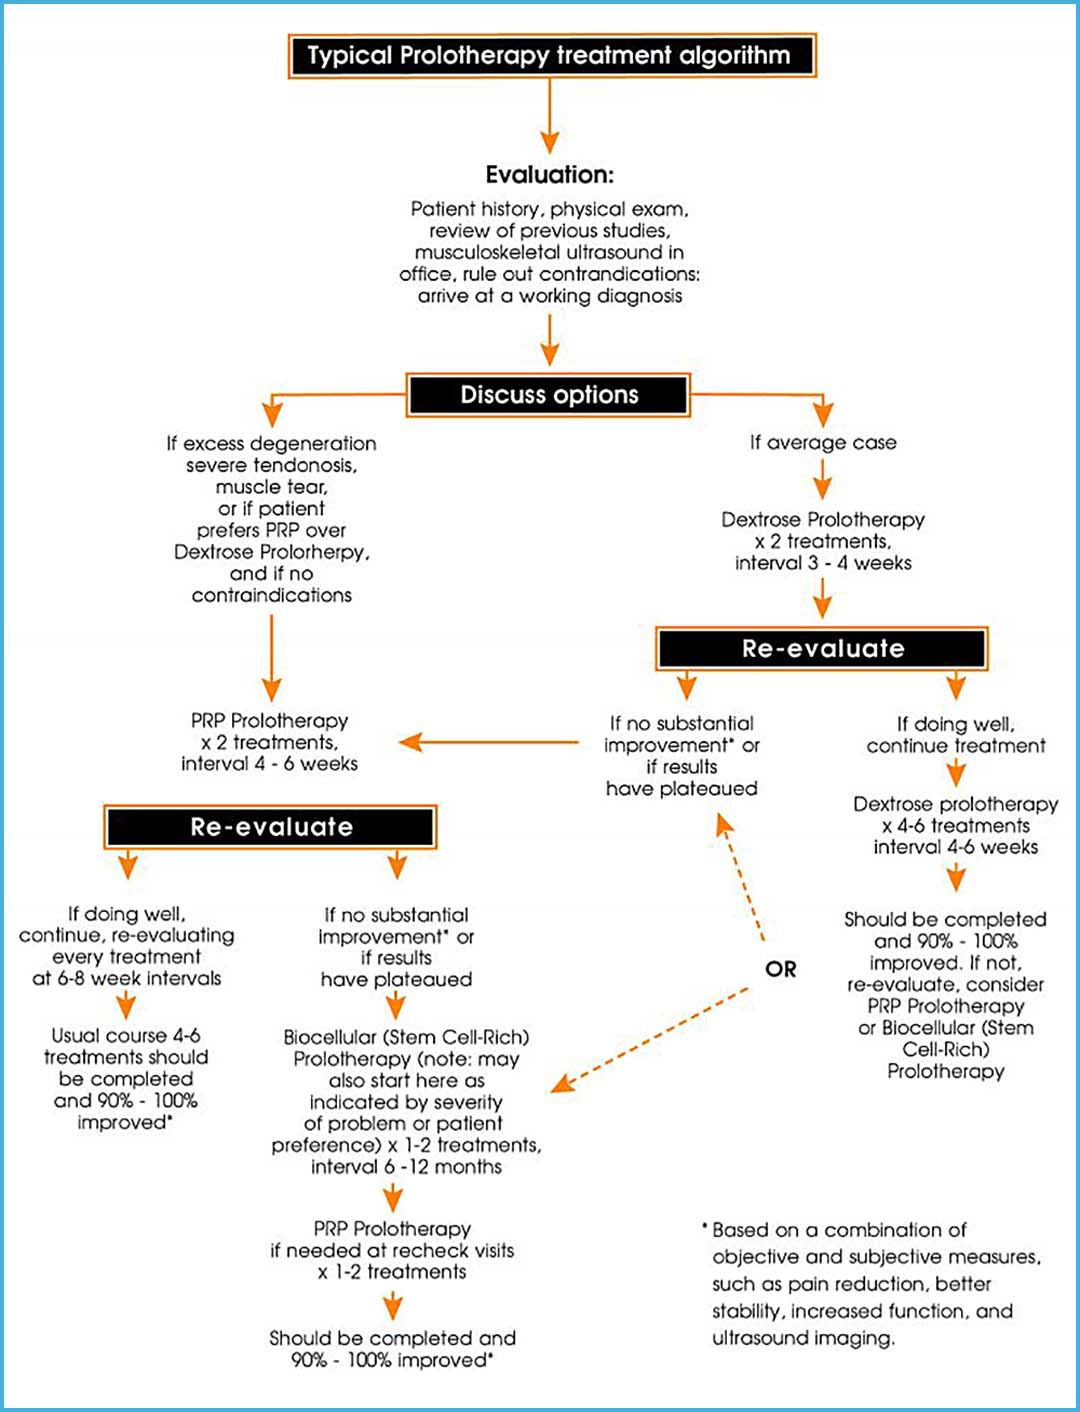 Image of a typical prolotherapy treatment algorithm